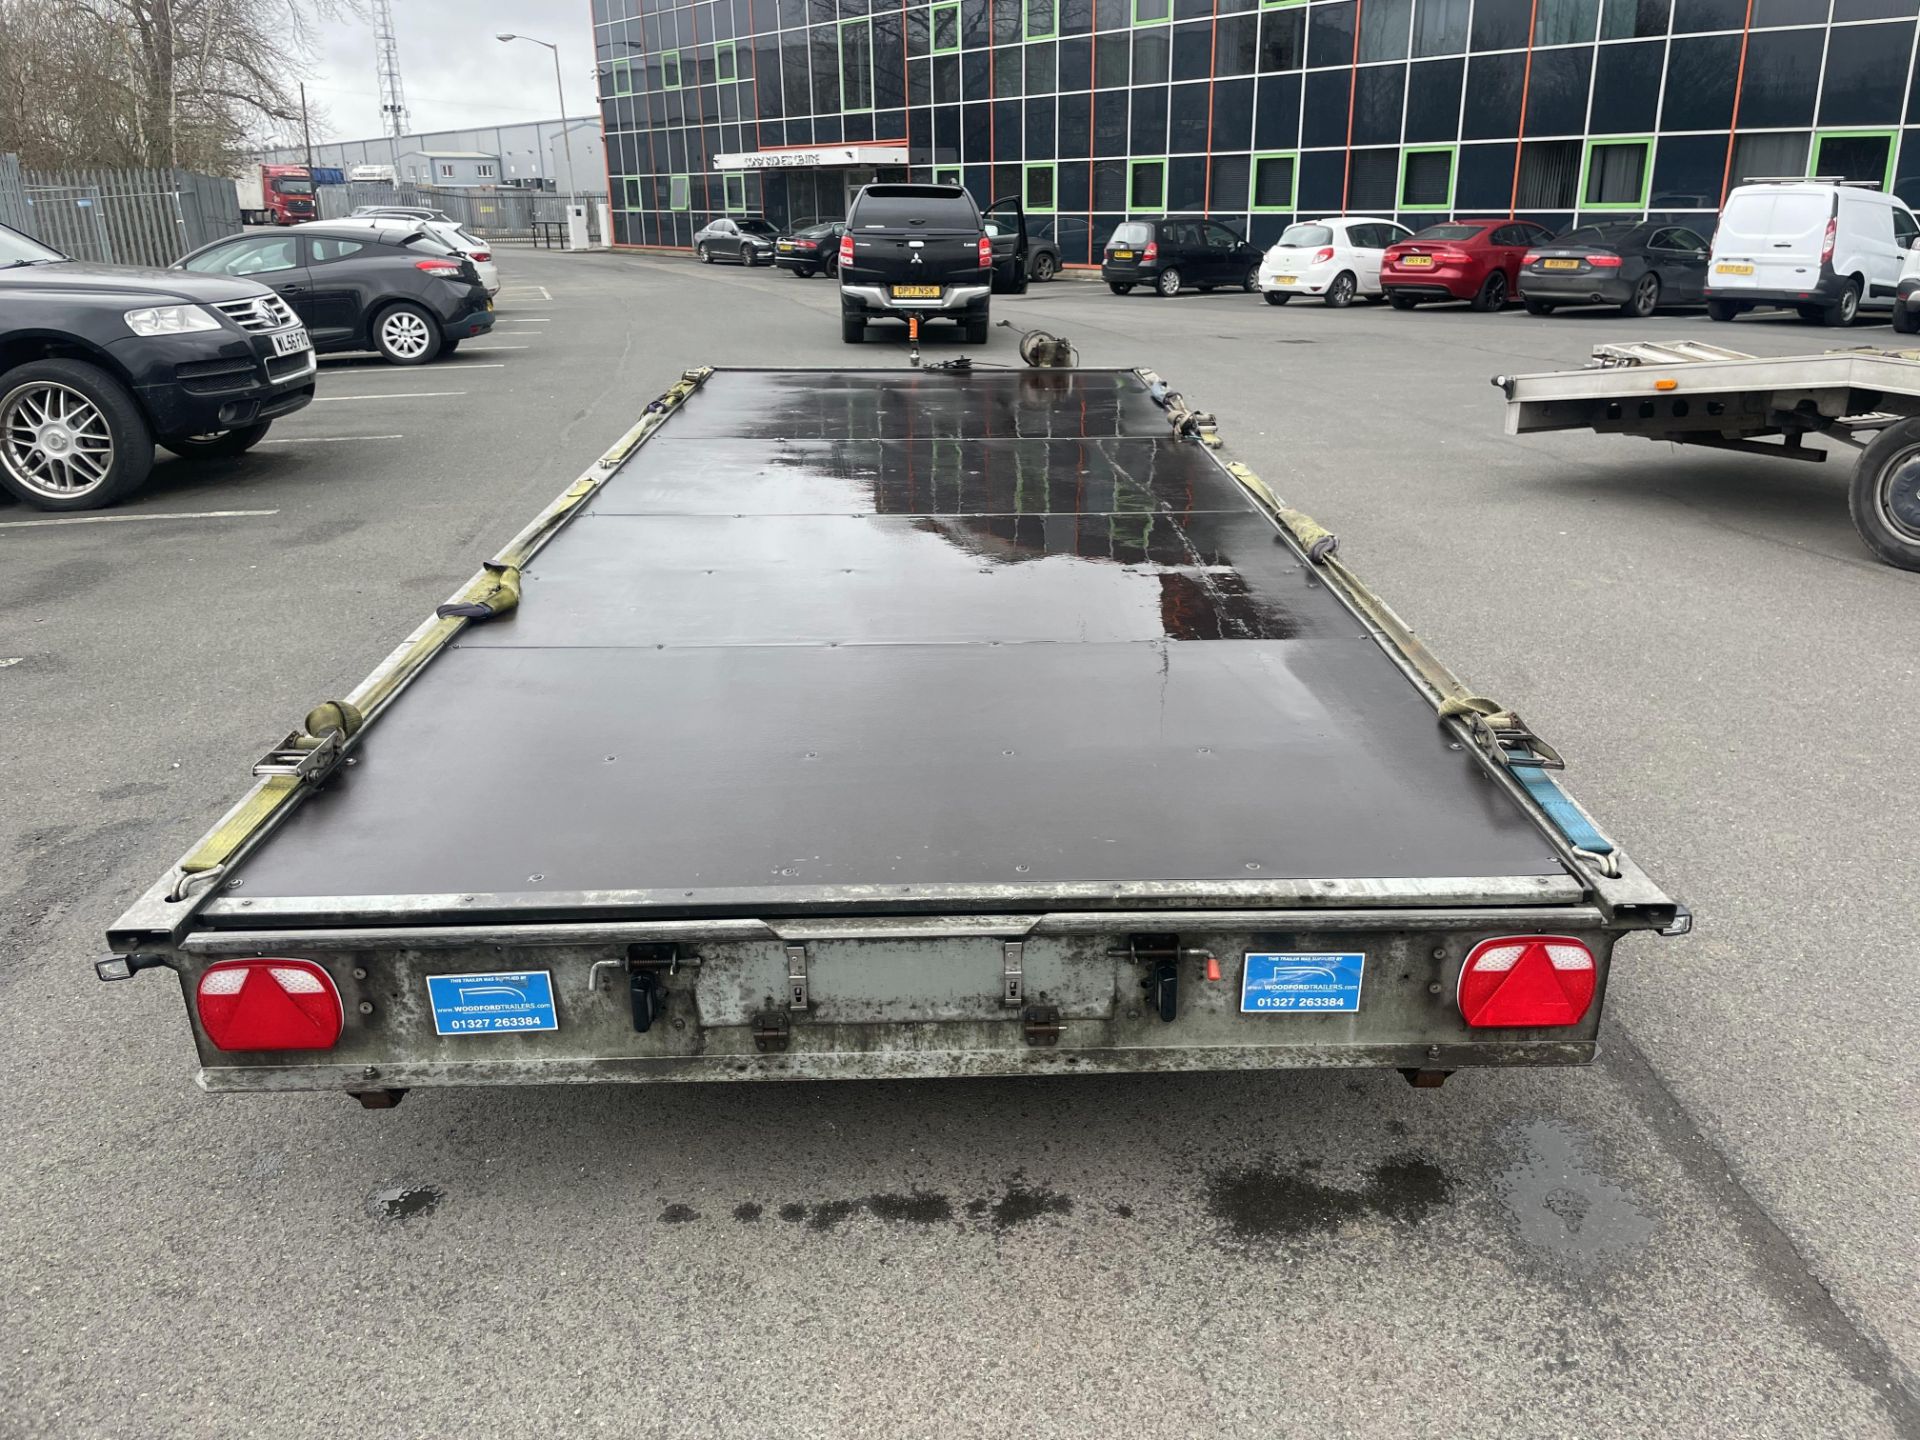 January 2021 Woodford 18 Ft Tri-Axle Hydraulic Tilt Flatbed Trailer c/w Ramps and Manual winch - Image 4 of 10